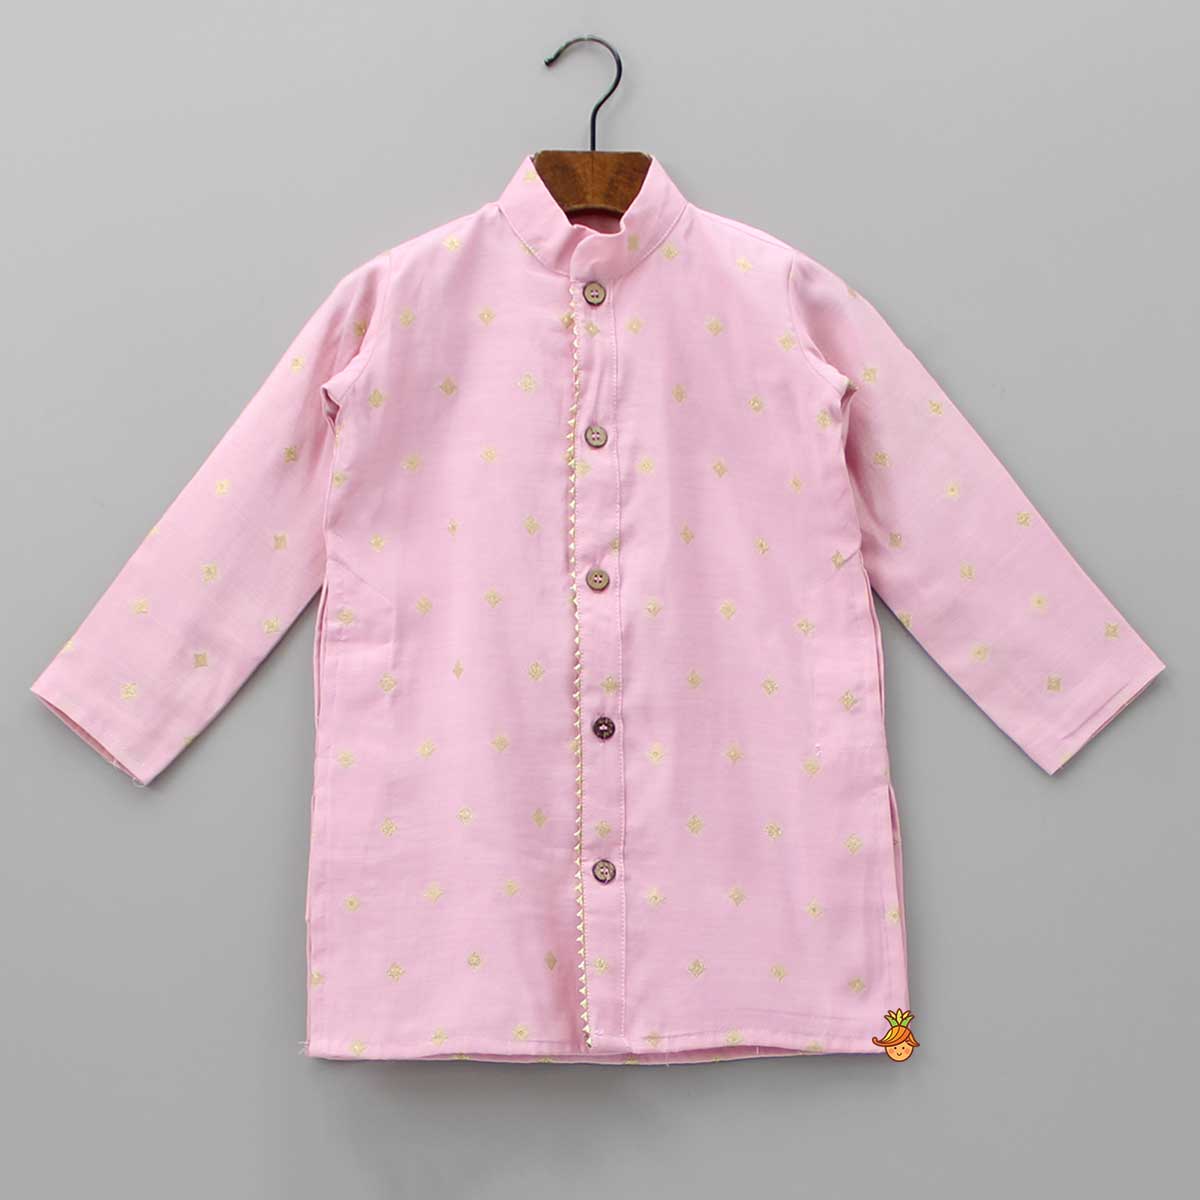 Pre Order: Front Open Booti Embroidered Pink Kurta And Beige Pyjama